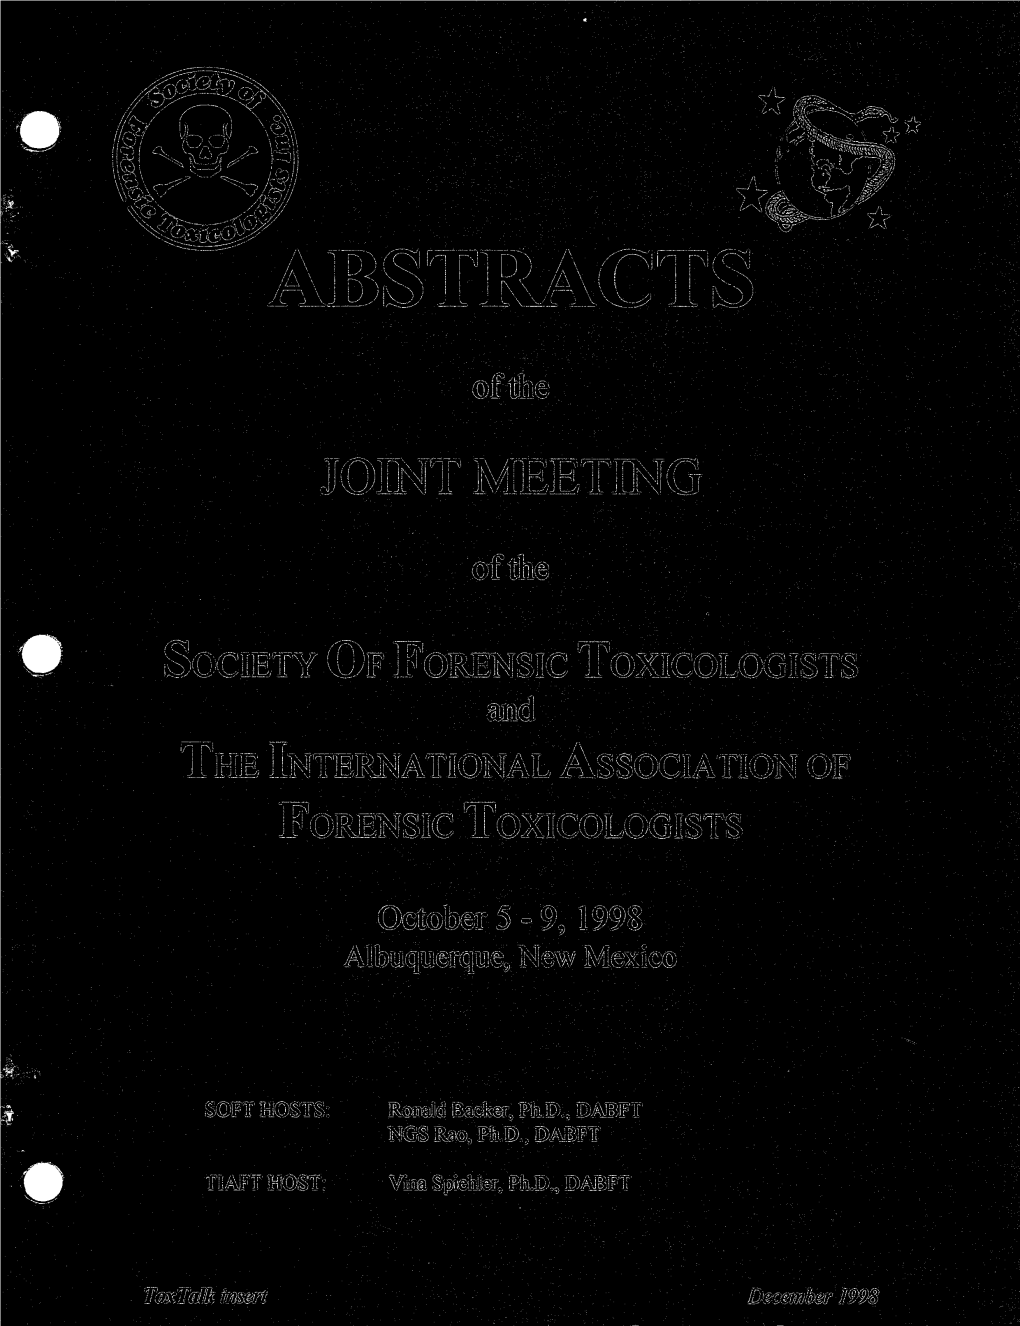 SOFT 1998 Meeting Abstracts.Pdf